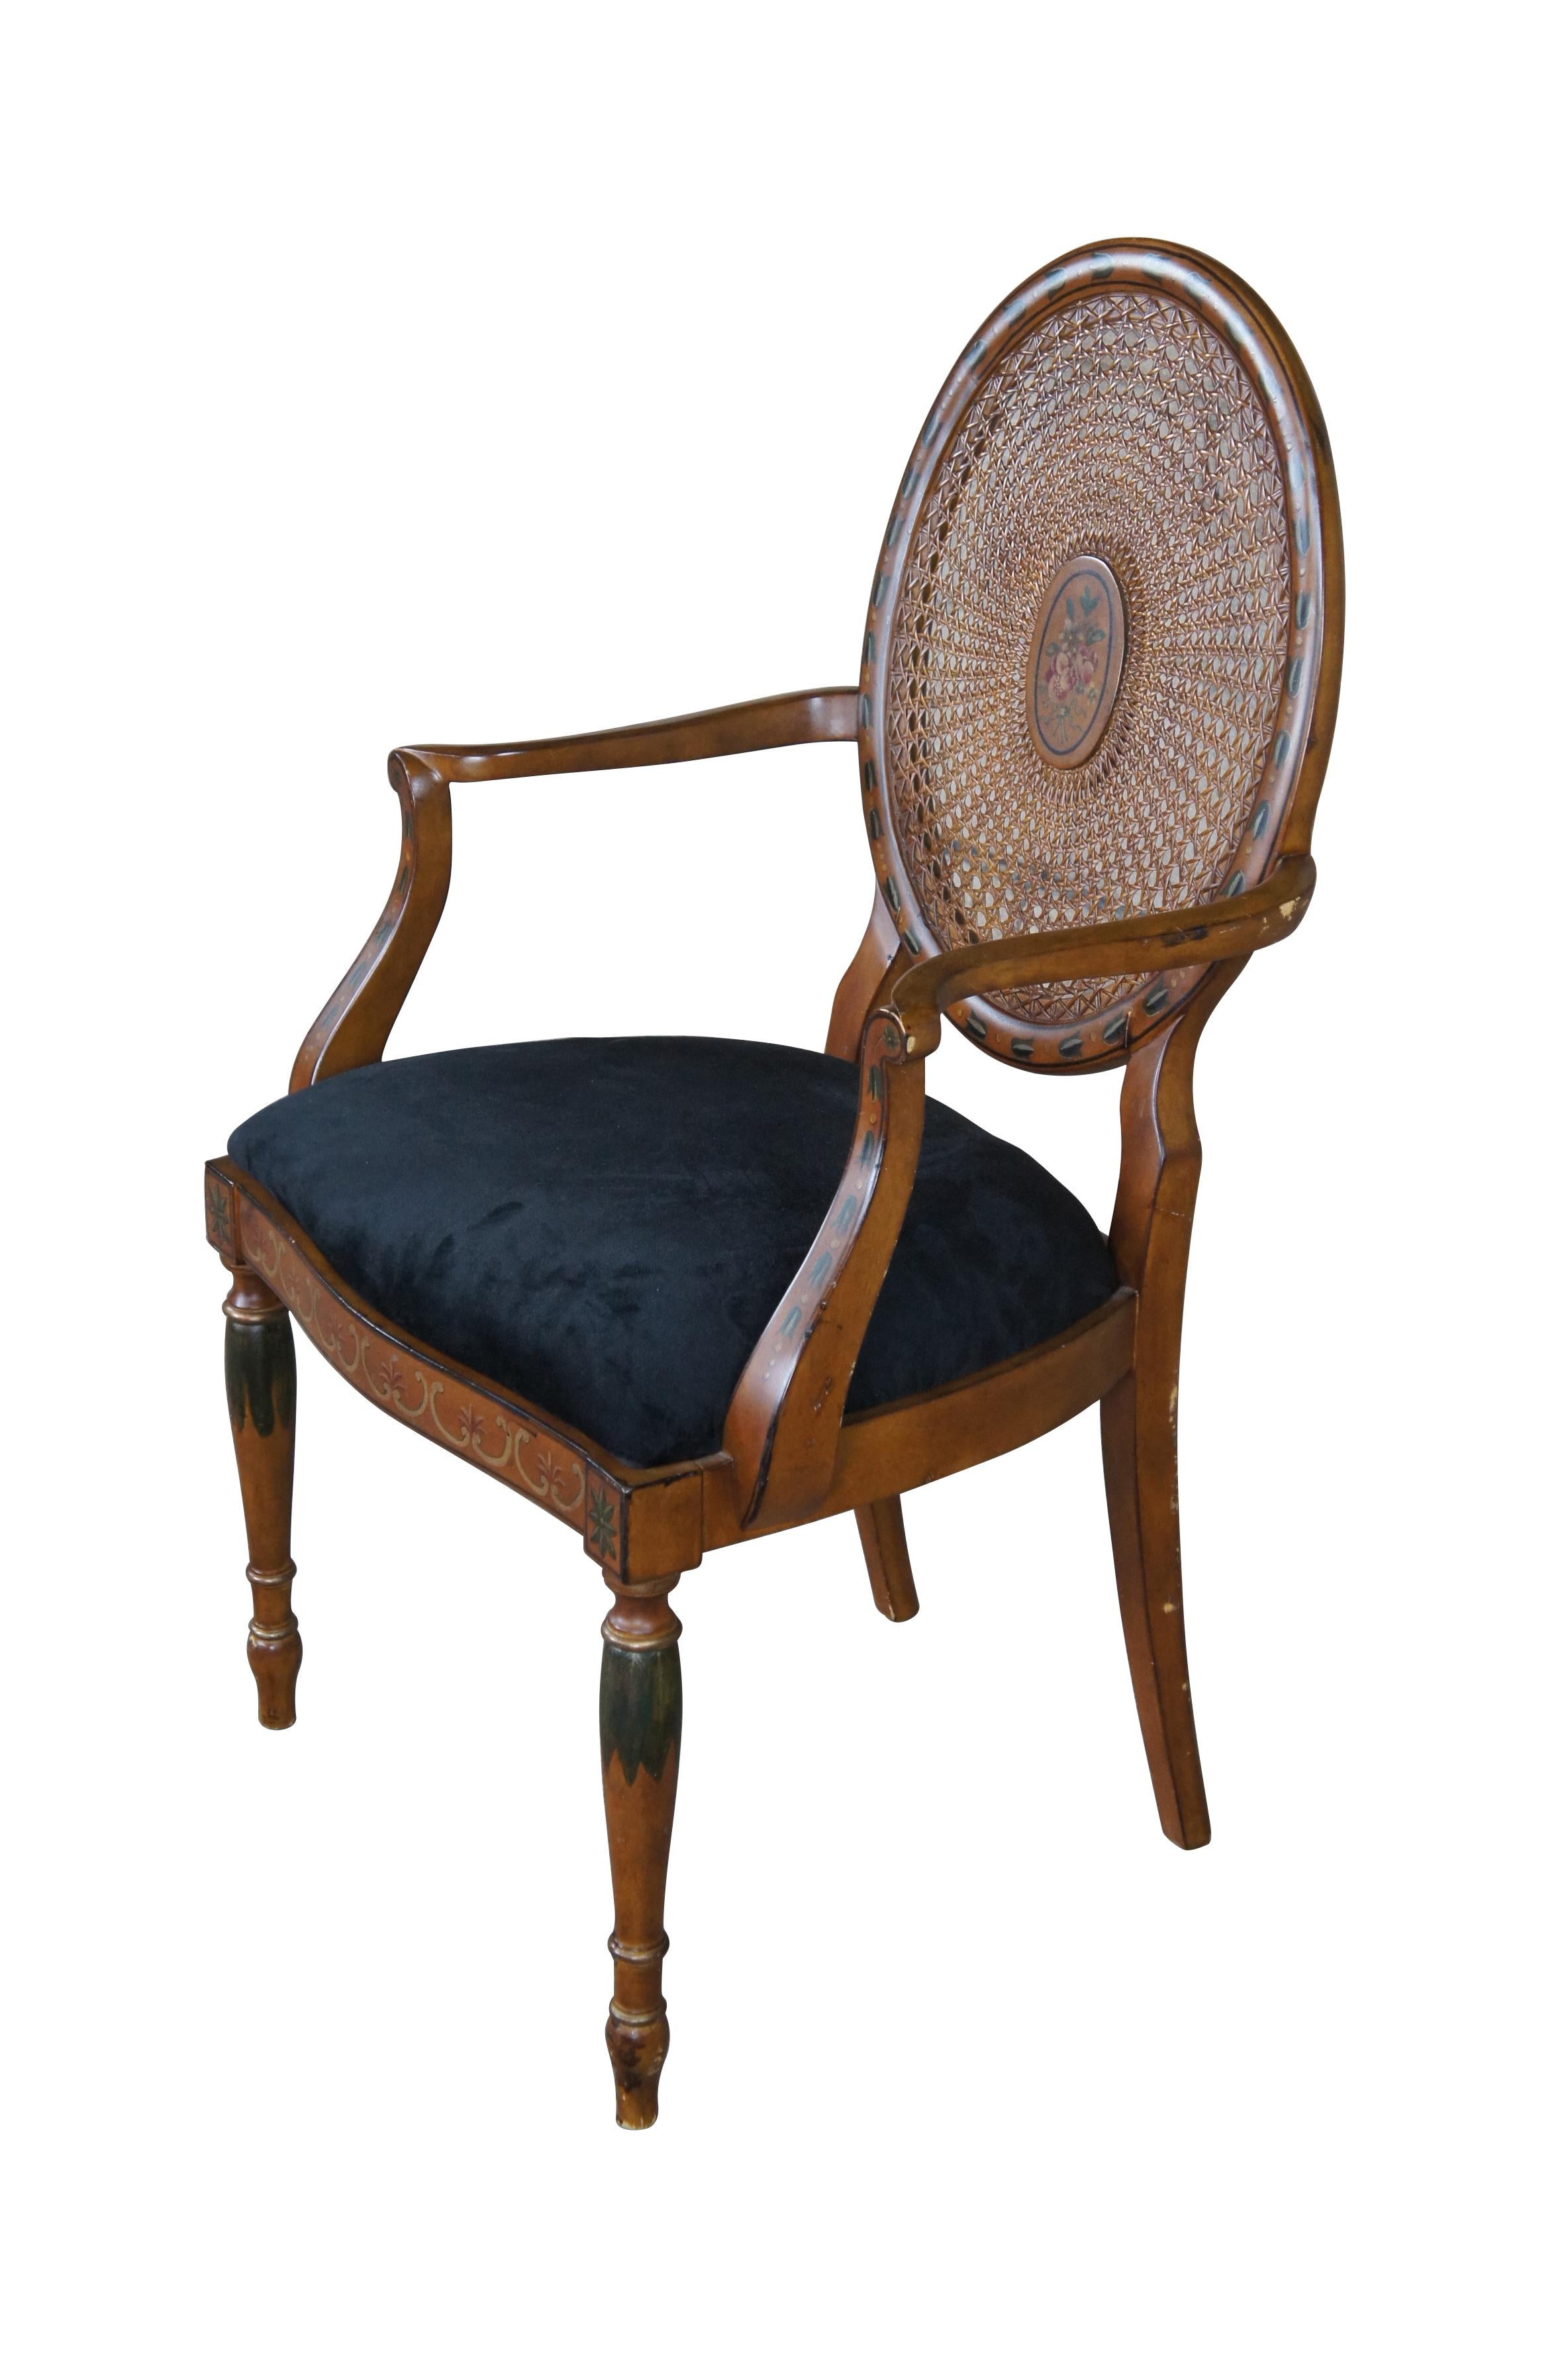 Italian Louis XVI Pulaski Furniture Wheelback Hand Painted Caned Arm Chair In Good Condition For Sale In Dayton, OH